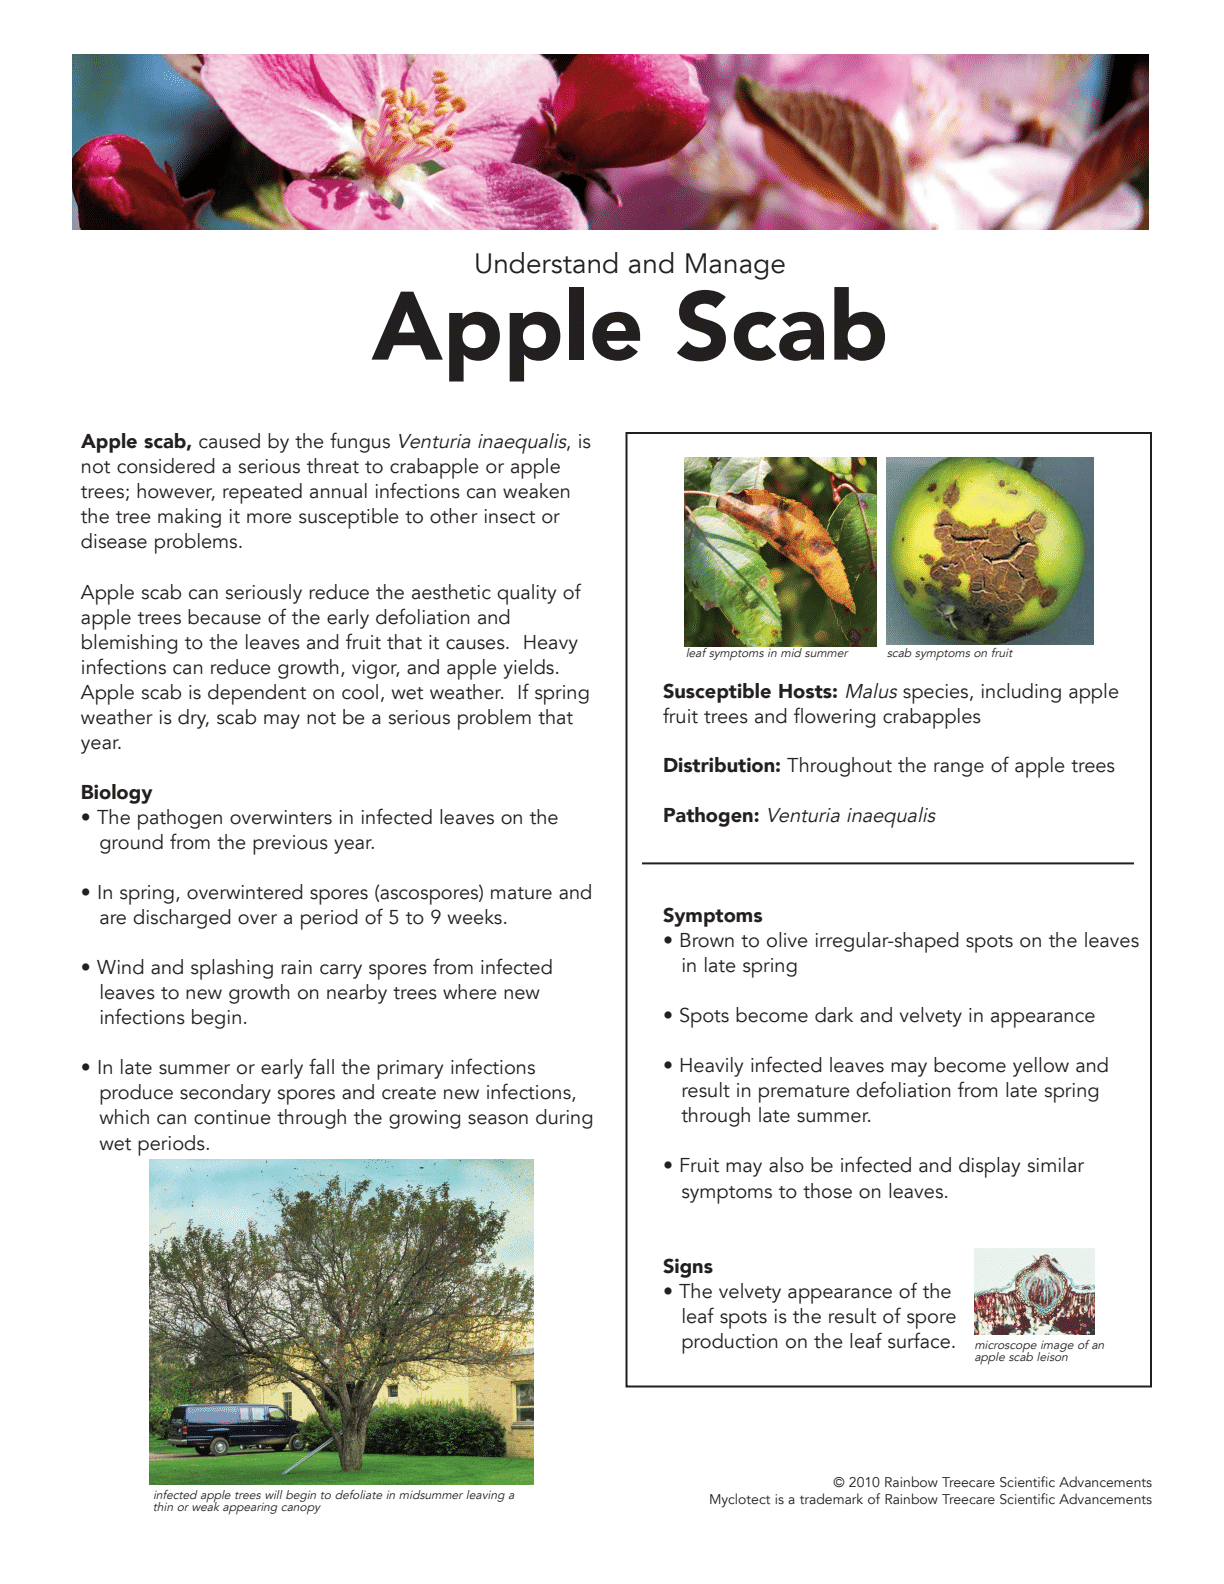 The image is an educational poster about "Apple Scab," detailing causes, symptoms, biology, and management of the disease, with photos of affected leaves and fruit.